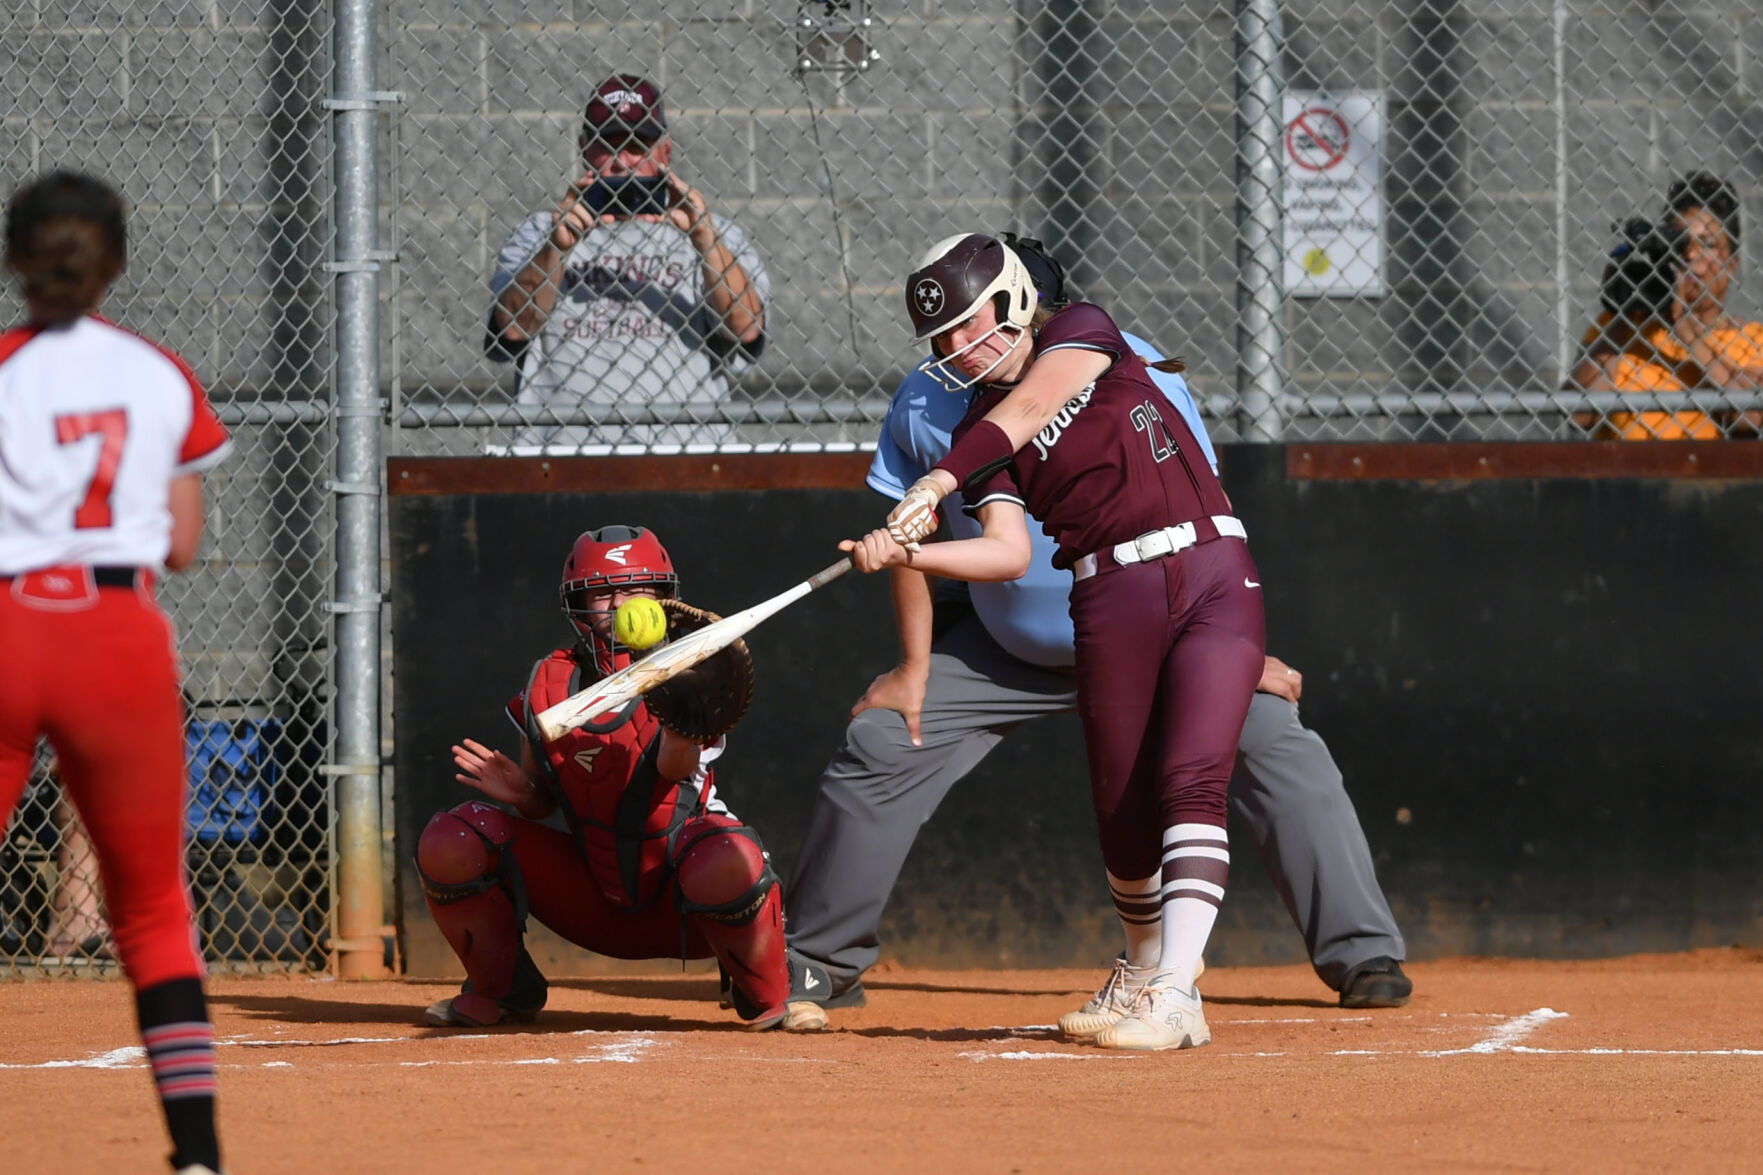 Tennessee High Softball: Junior Macie Strouth’s Grit and Batting Prowess Drive Team Success